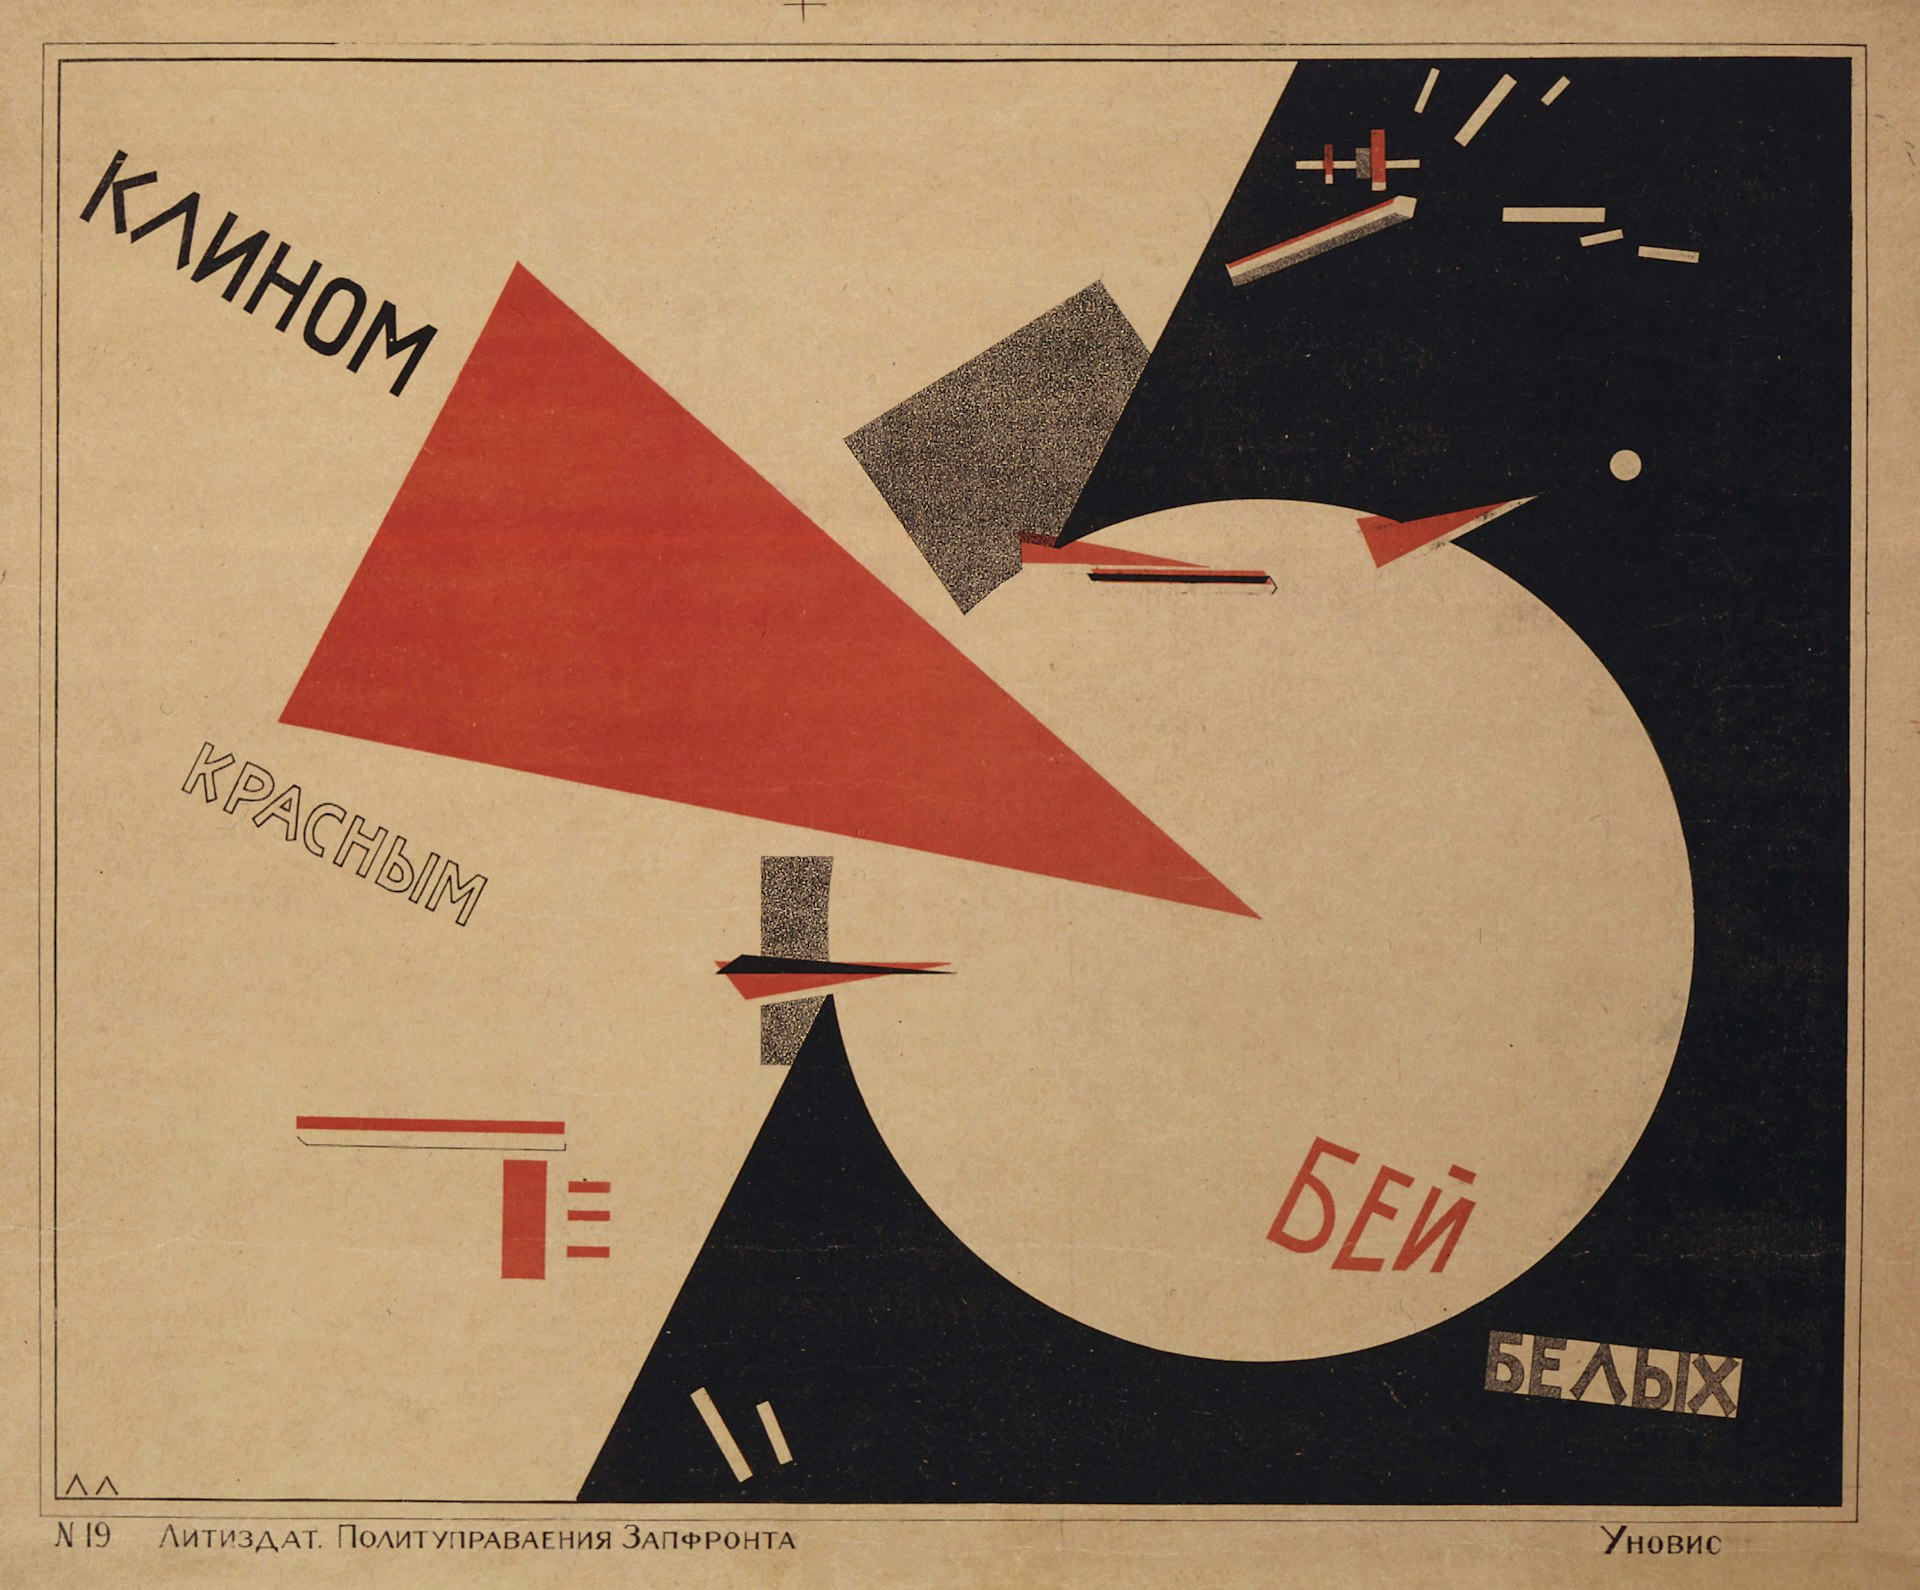 Beat the Whites with the Red Wedge, El Lissitzy, 1920. Purchased 2016. The David King Collection at Tate